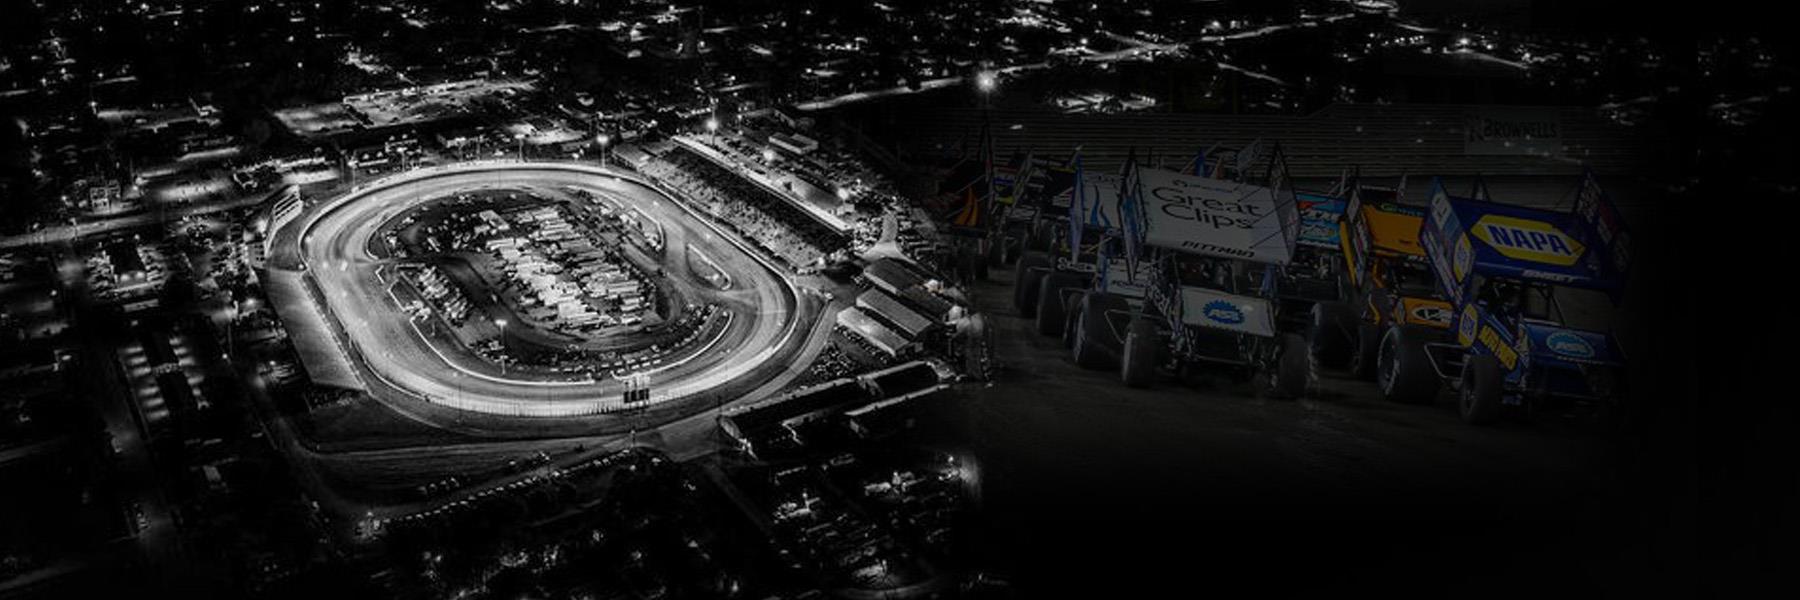 7/20/2013 - Knoxville Raceway